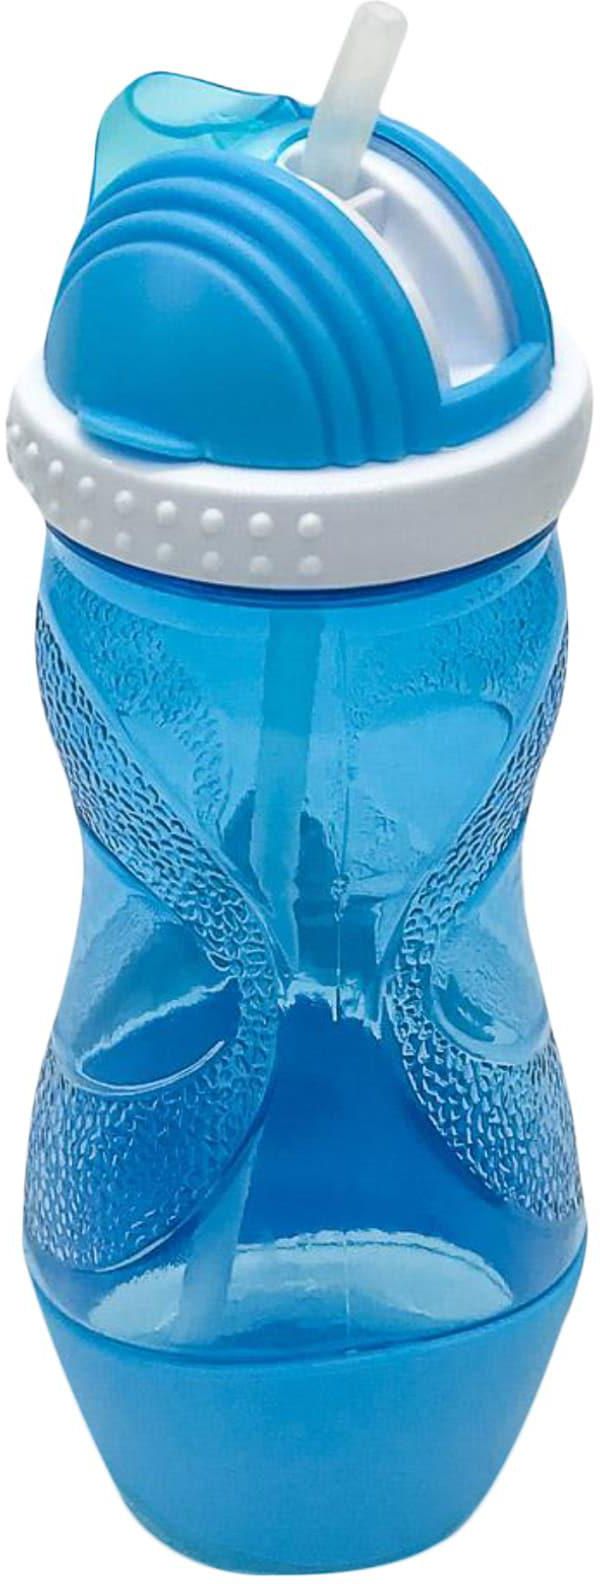 Qlux Kido Water Bottle With Straw Blue